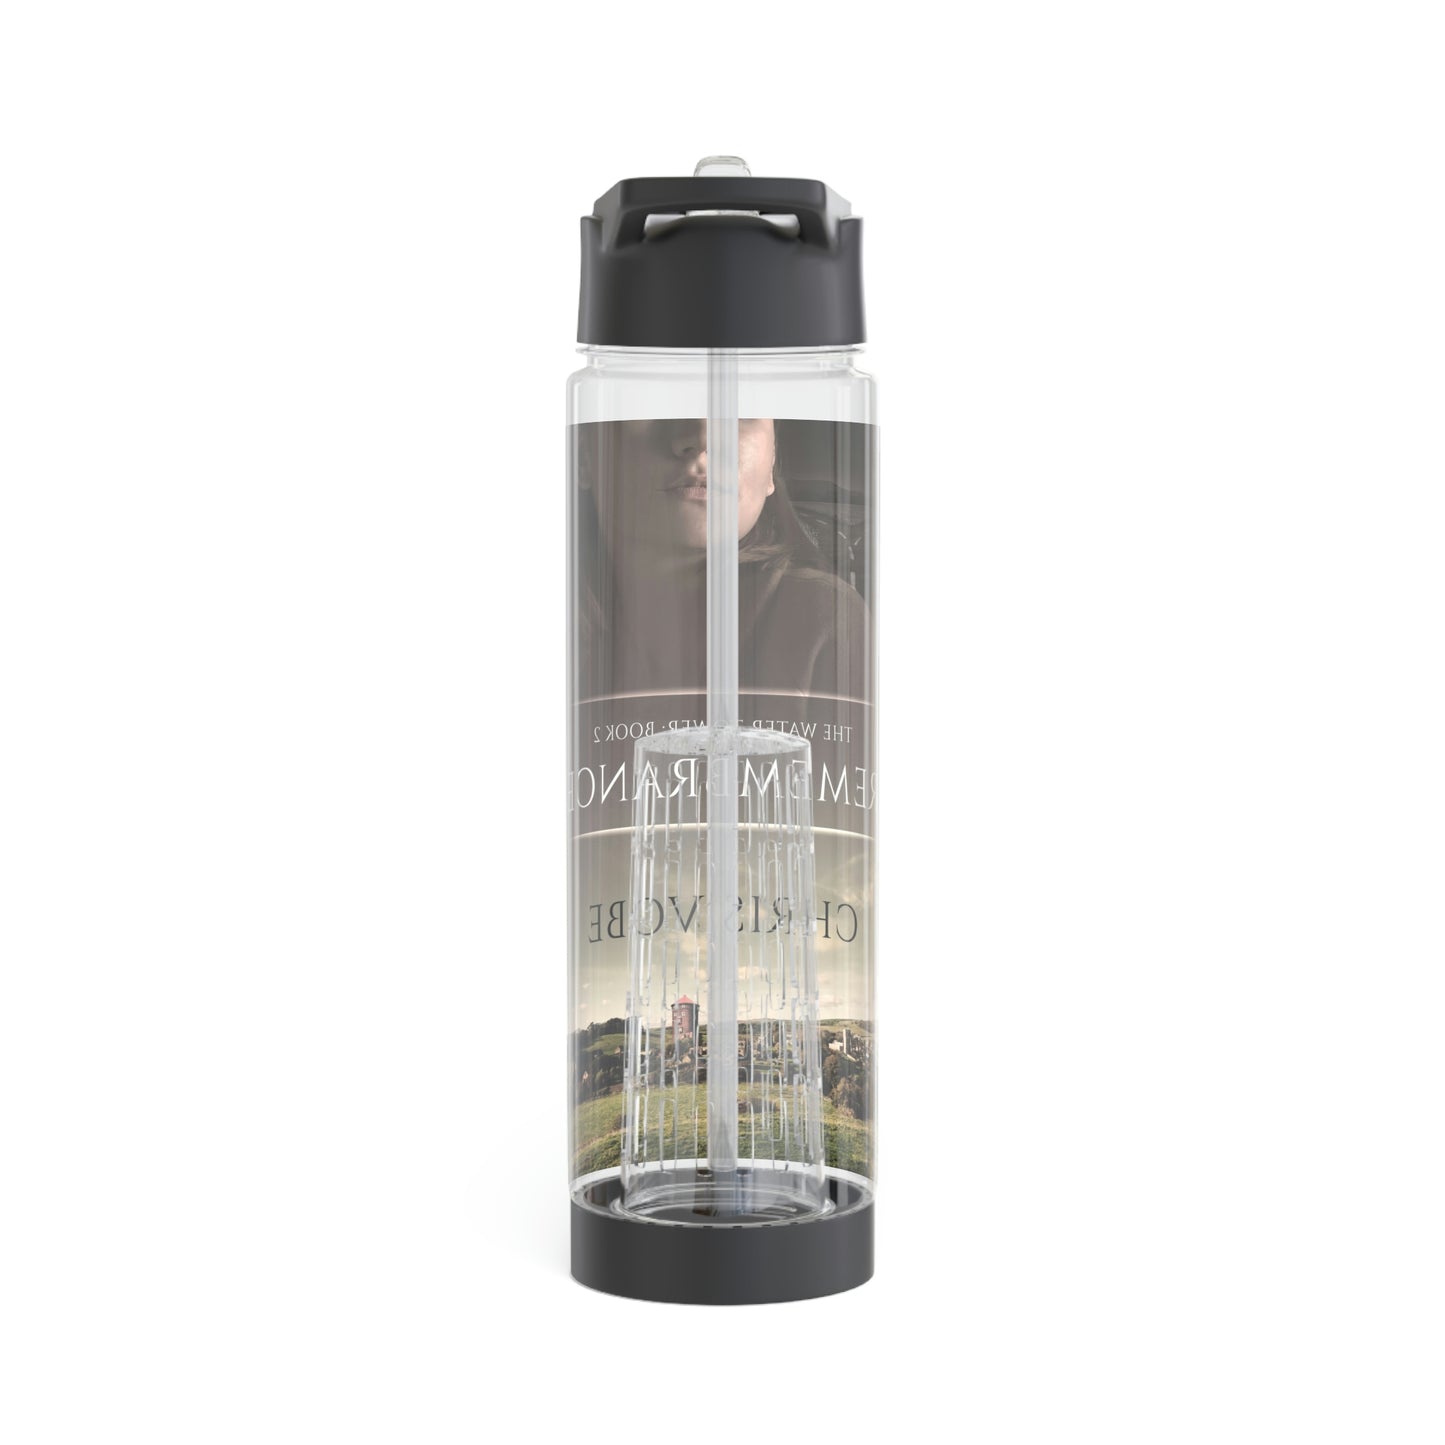 Remembrance - Infuser Water Bottle